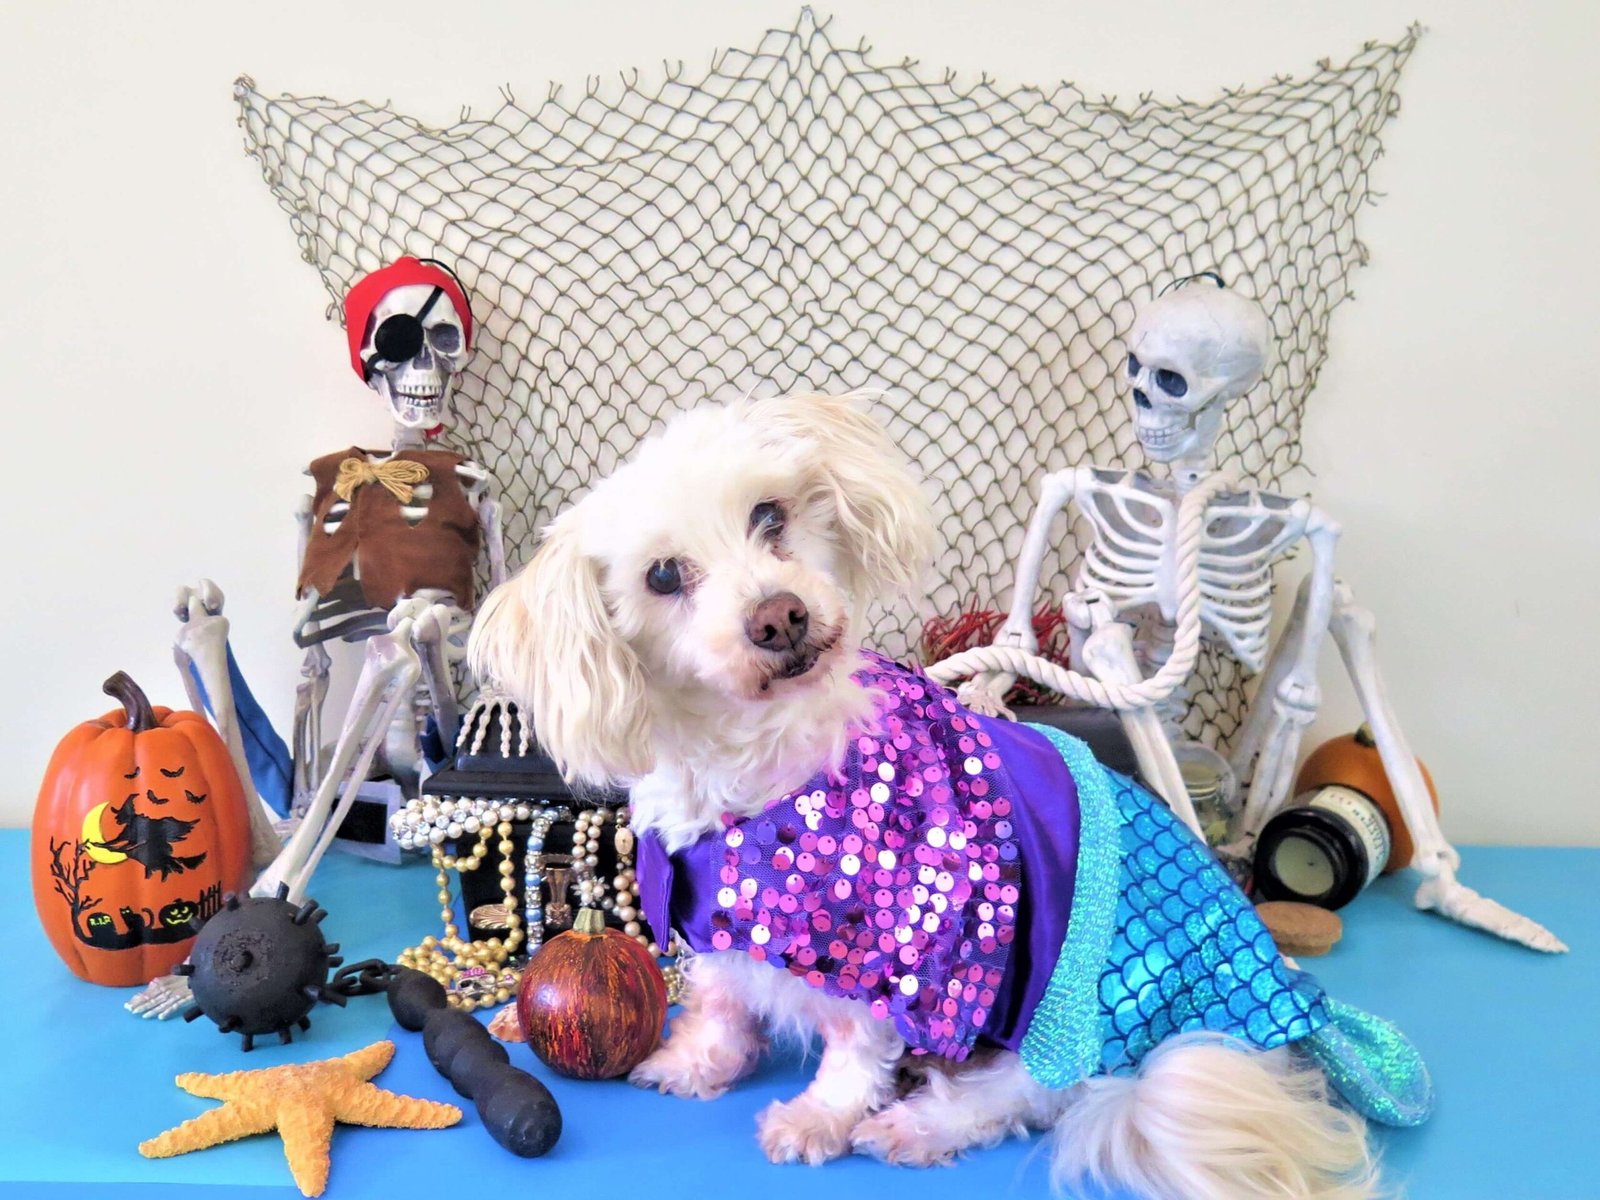 Avoid Puppy Halloween Costumes with Dangling or Choking Hazards